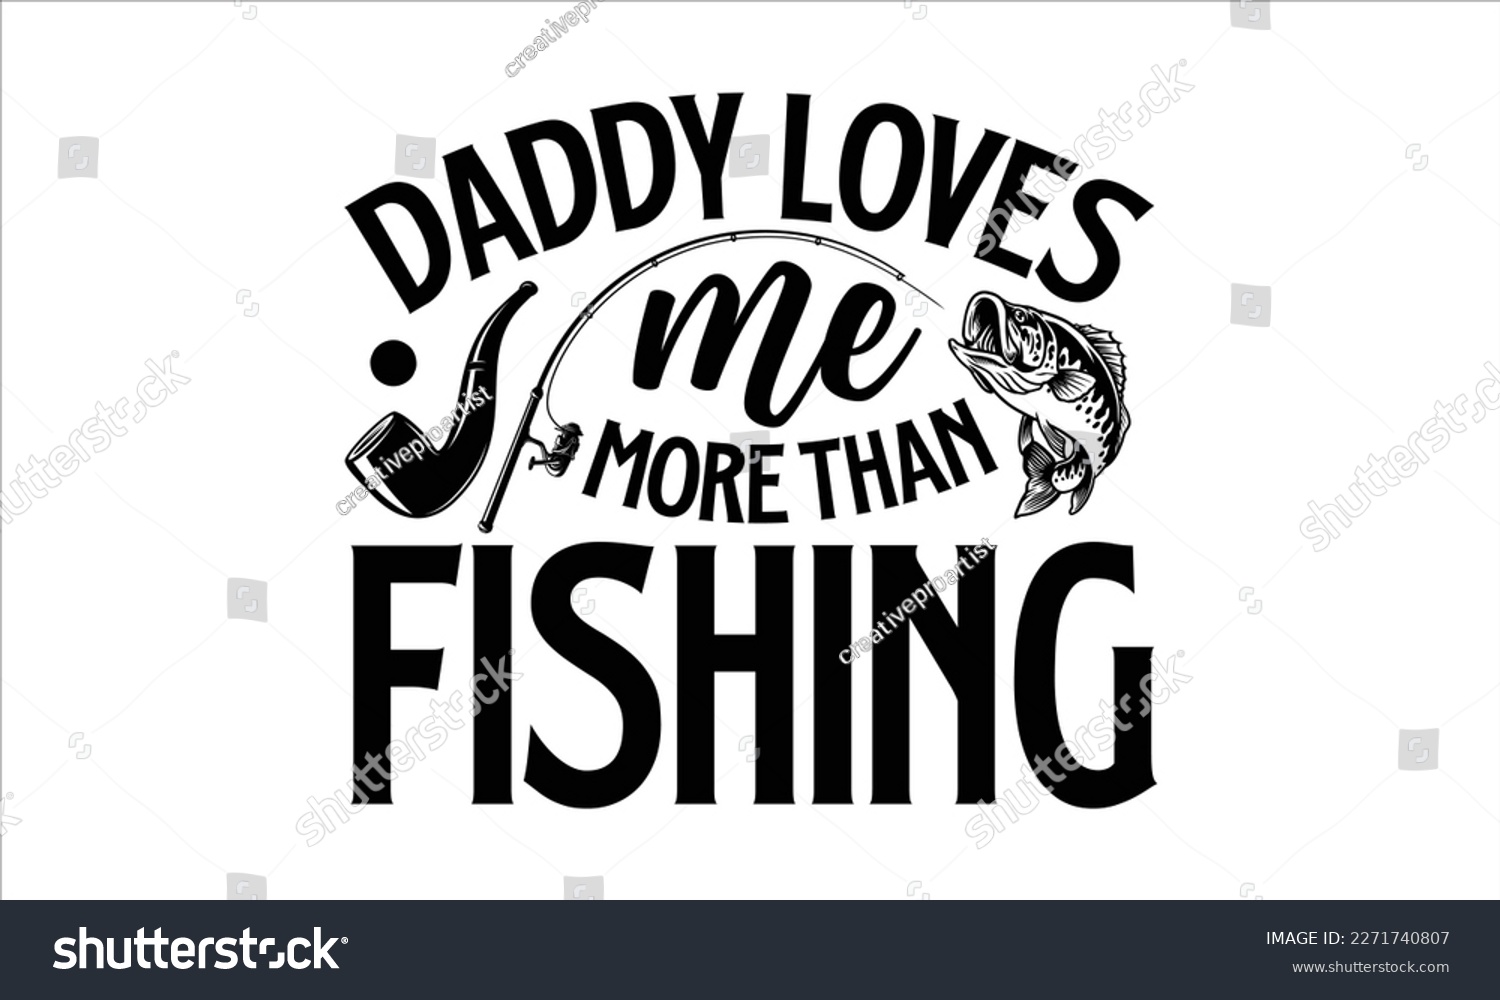 SVG of Daddy loves me more than fishing- Father's Day svg design, Hand drawn lettering phrase isolated on white background, Illustration for prints on t-shirts and bags, posters, cards eps 10. svg